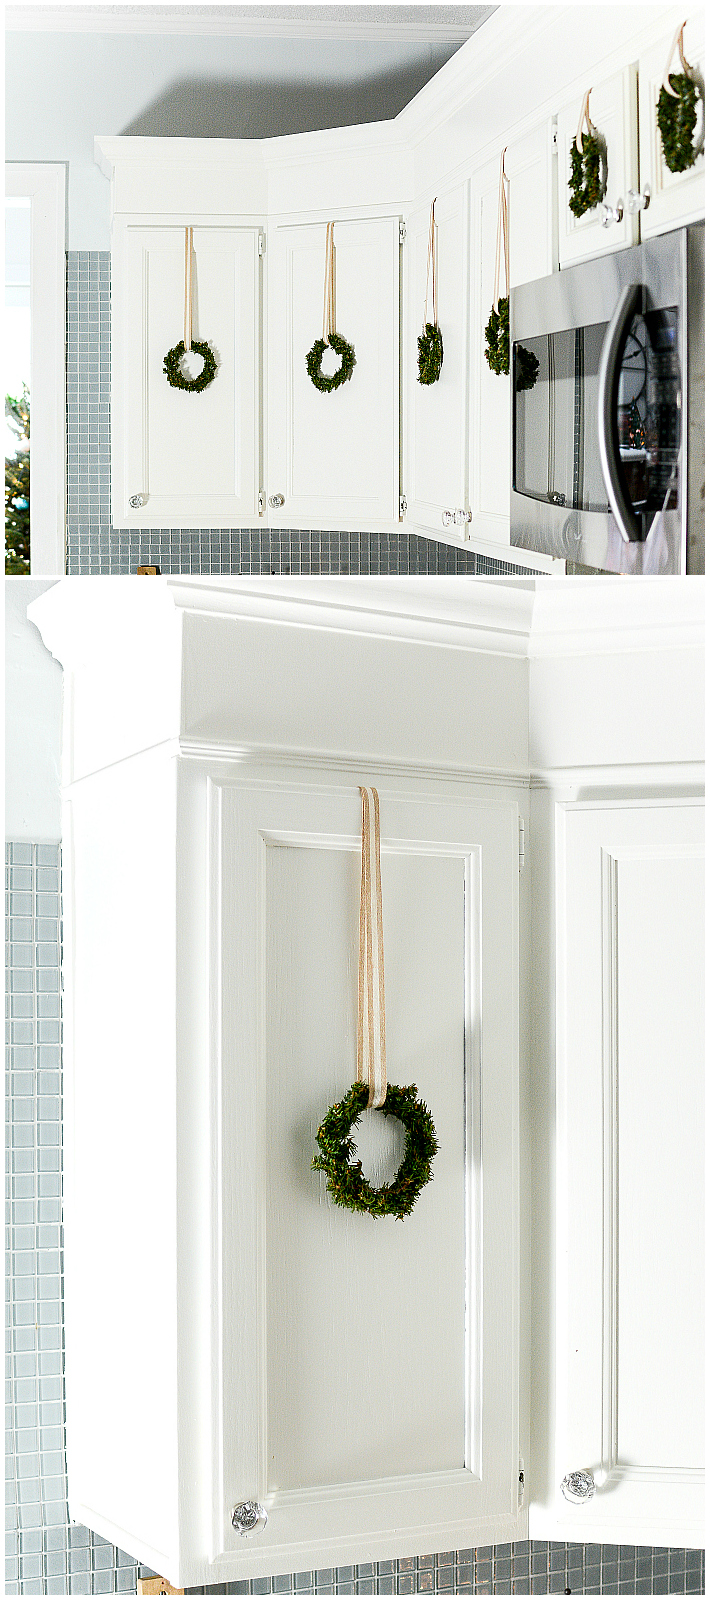 Decorating with Wreaths Indoors - Mini Wreaths on Kitchen Cabinets